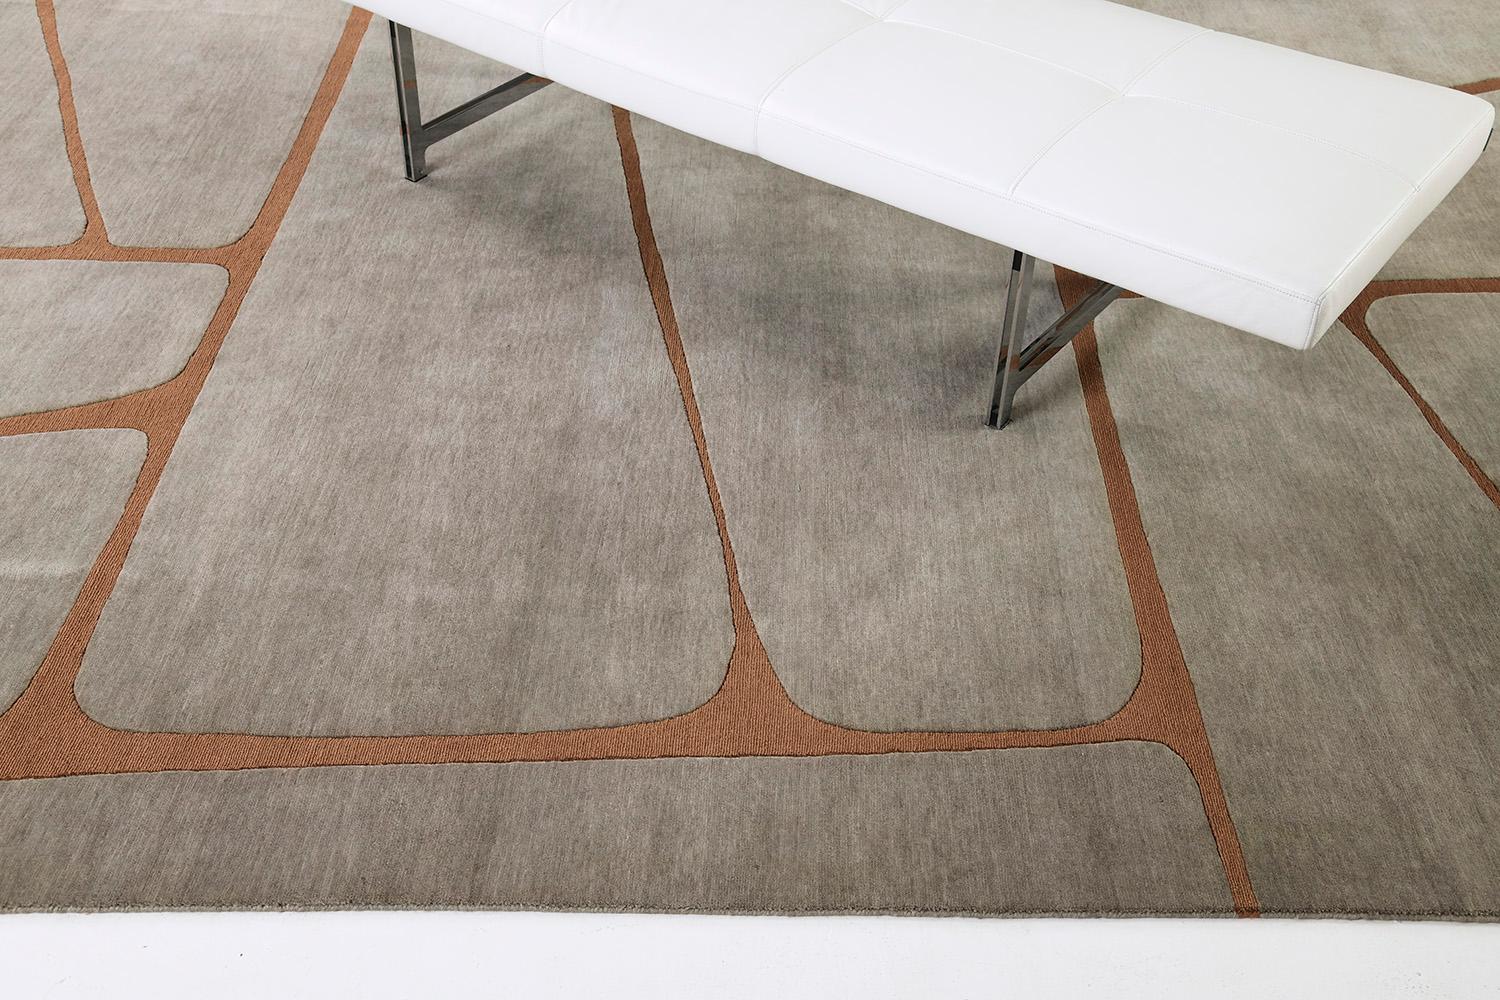 Large wedge forms in a loop and pile construction. Bold, elegant, lasting. Here in an all-wool construction, gray-taupe with deep rust accent.

Rug Number
29343
Size
9' 0